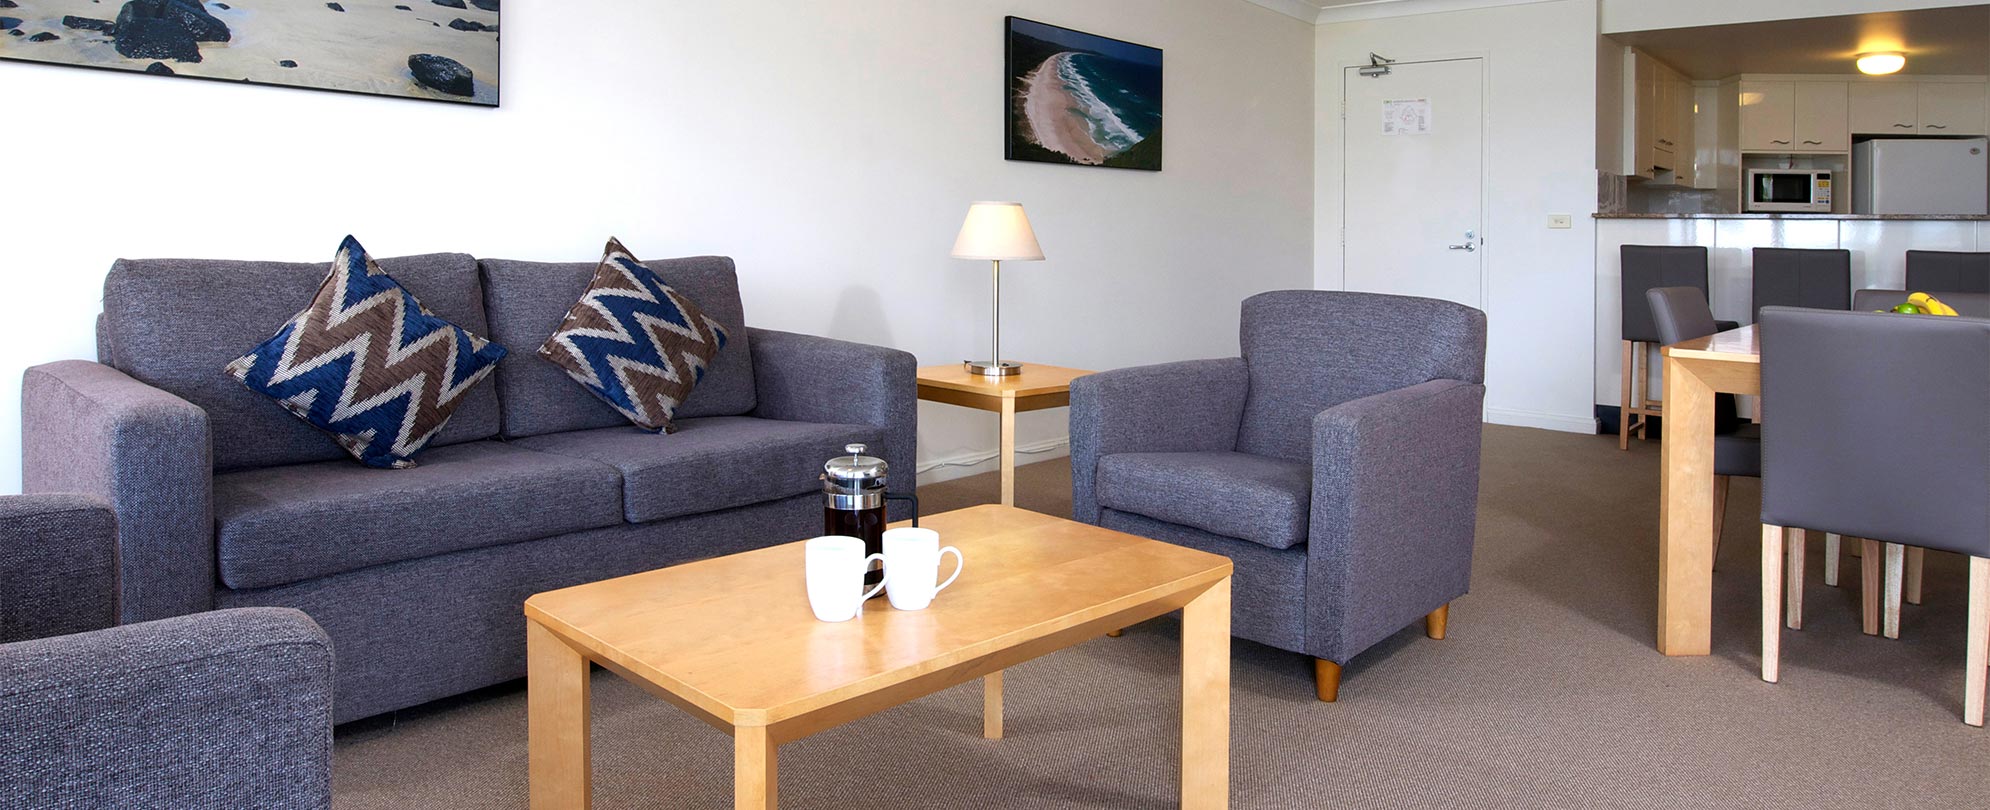 Couch, chairs, and coffee table in the standard living space of a Club Wyndham Port Macquarie suite.